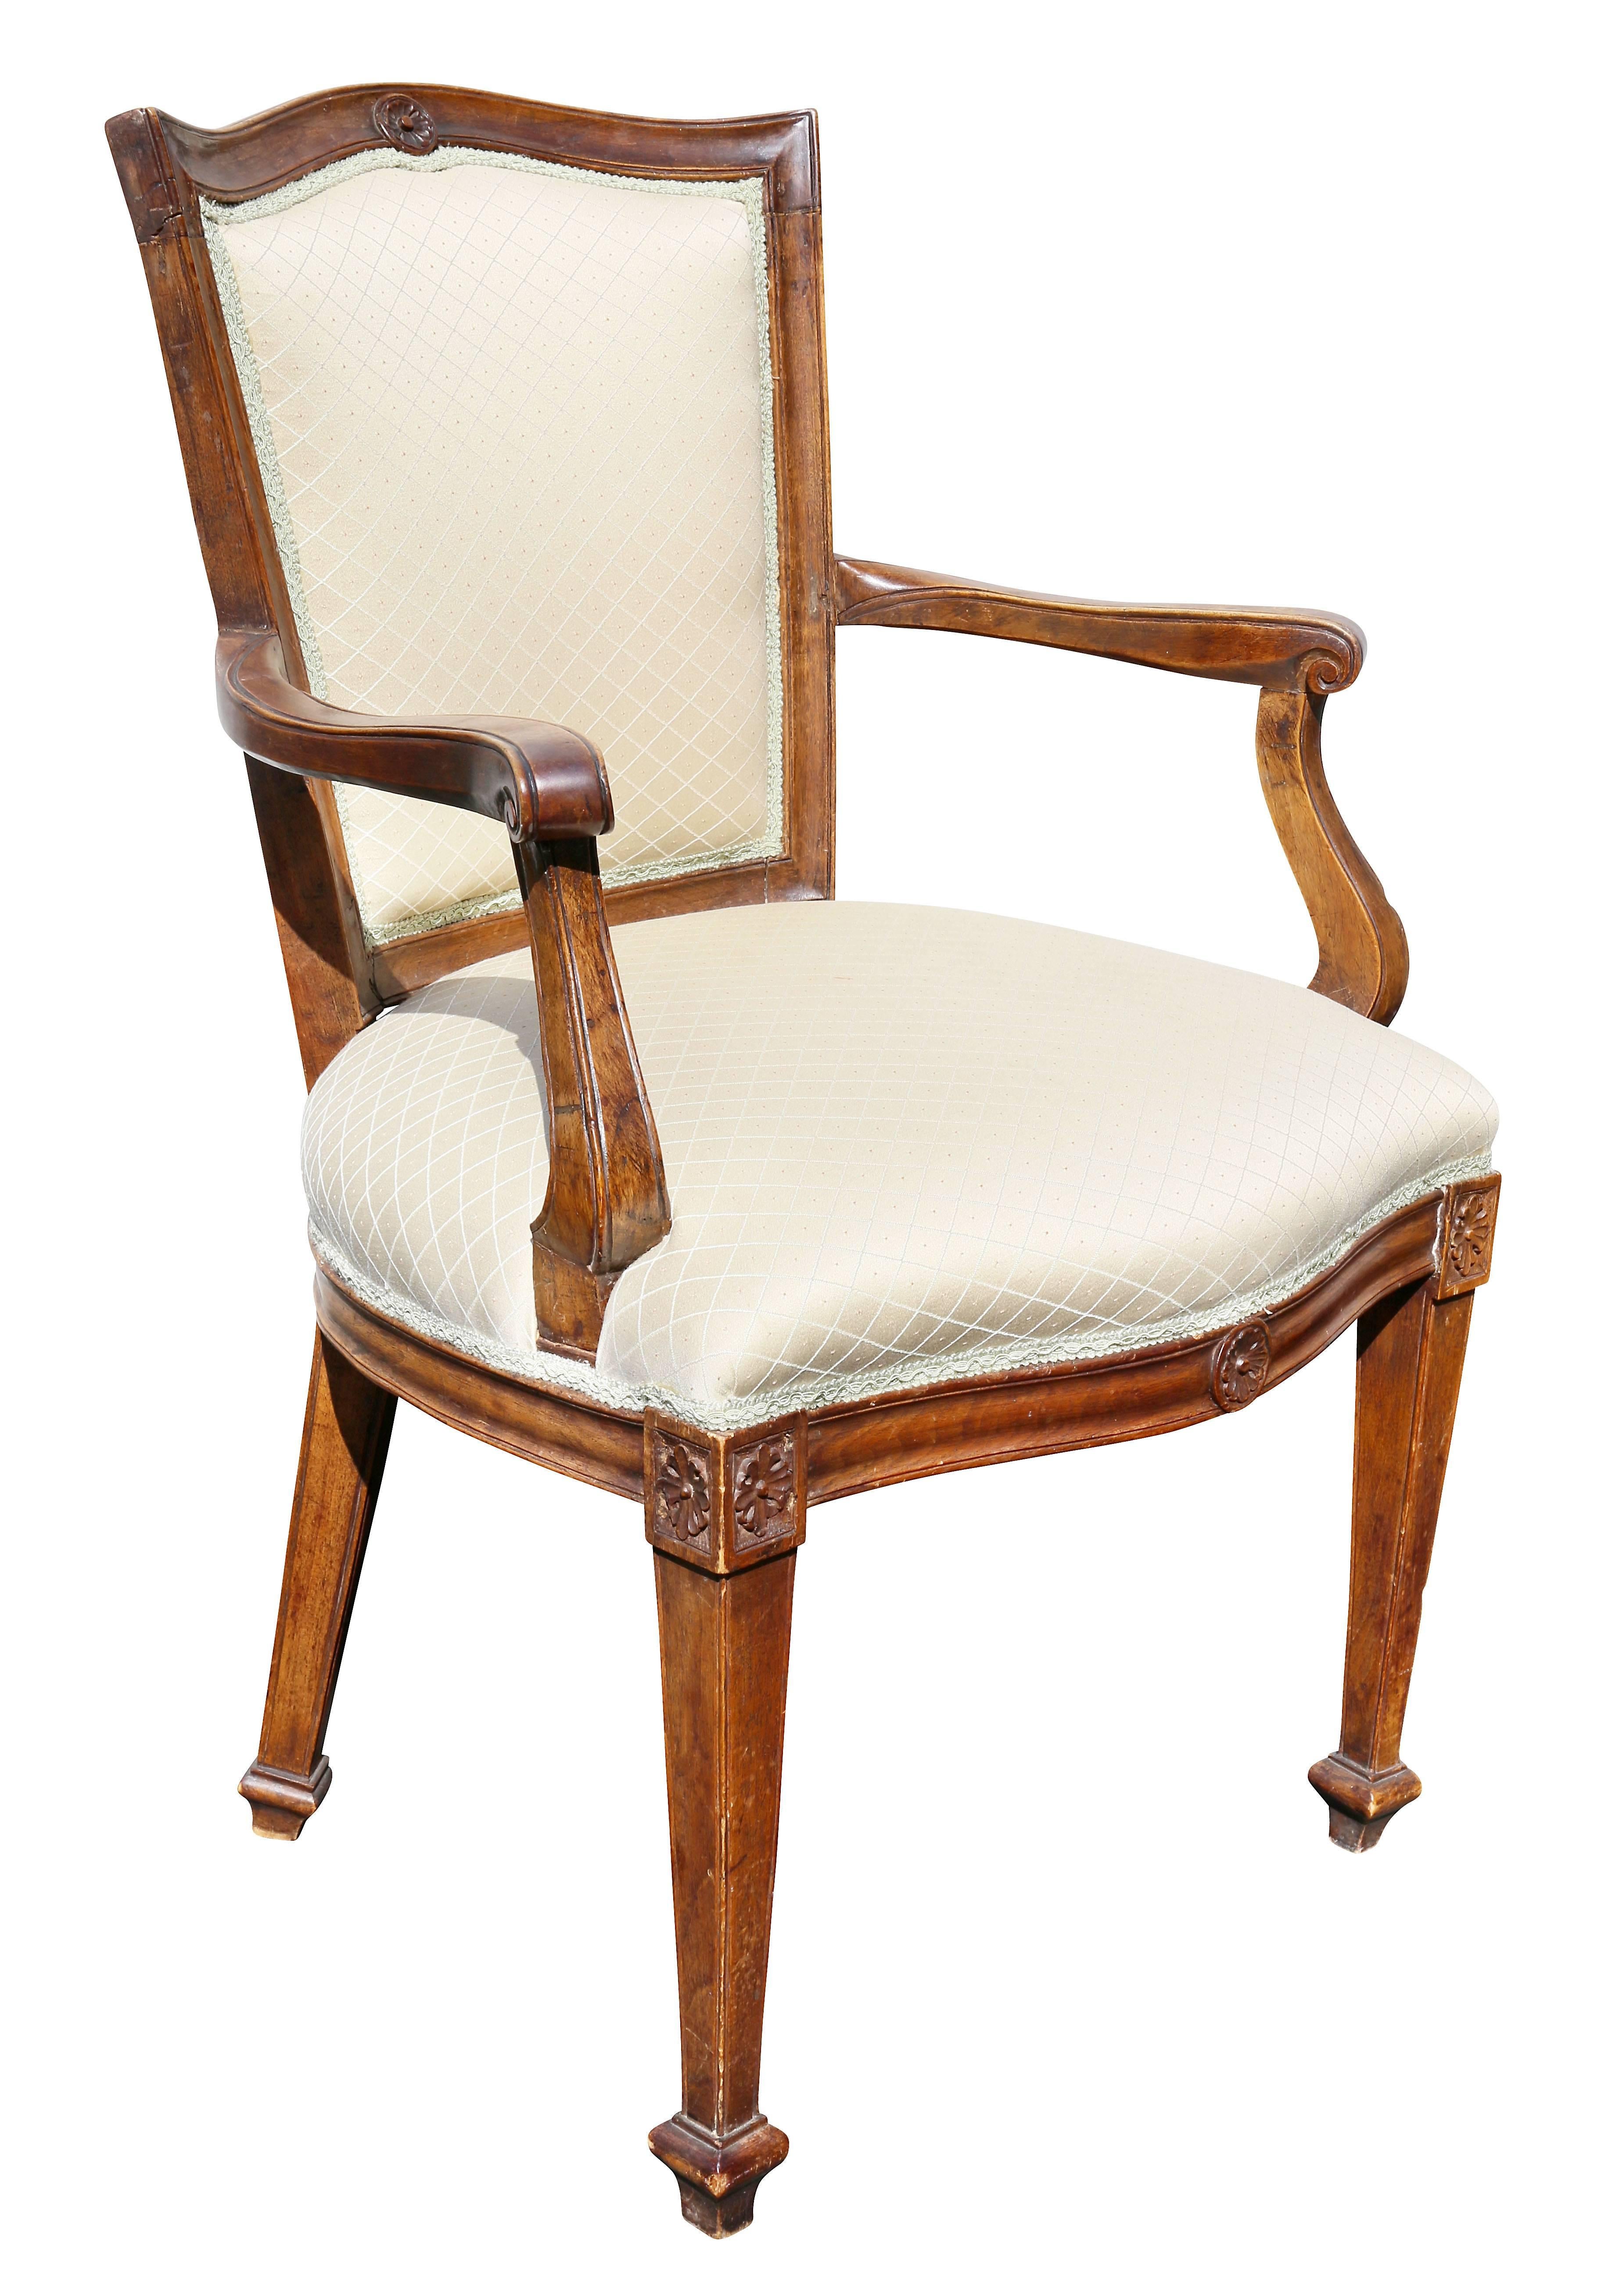 Each with serpentine crest rail with central circular carving over an upholstered back and feat, raised on square tapered legs.